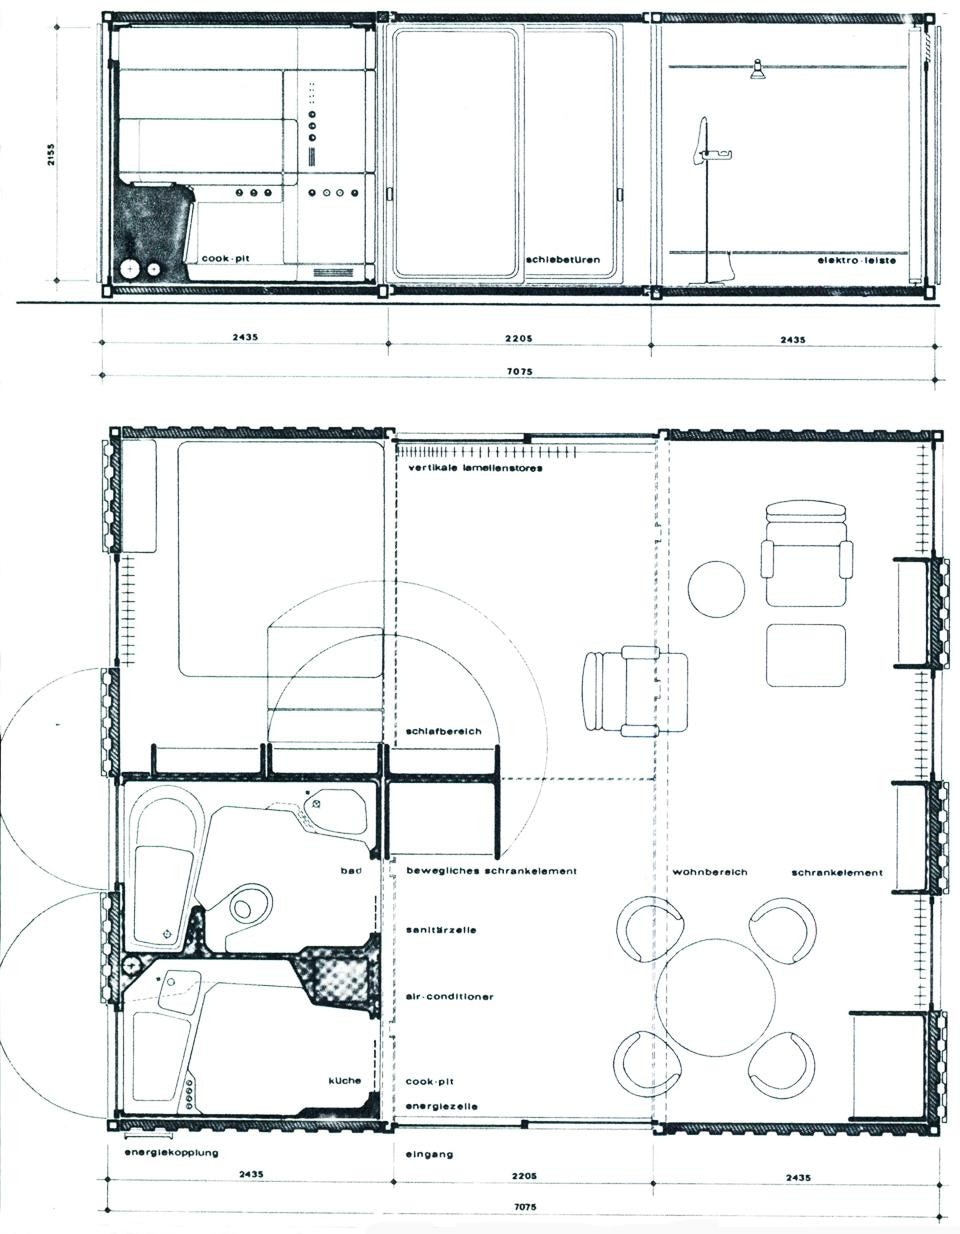 Details from the pages of Domus 467 / October 1968. Wilfried Lubitz, project for an itinerant house, plan